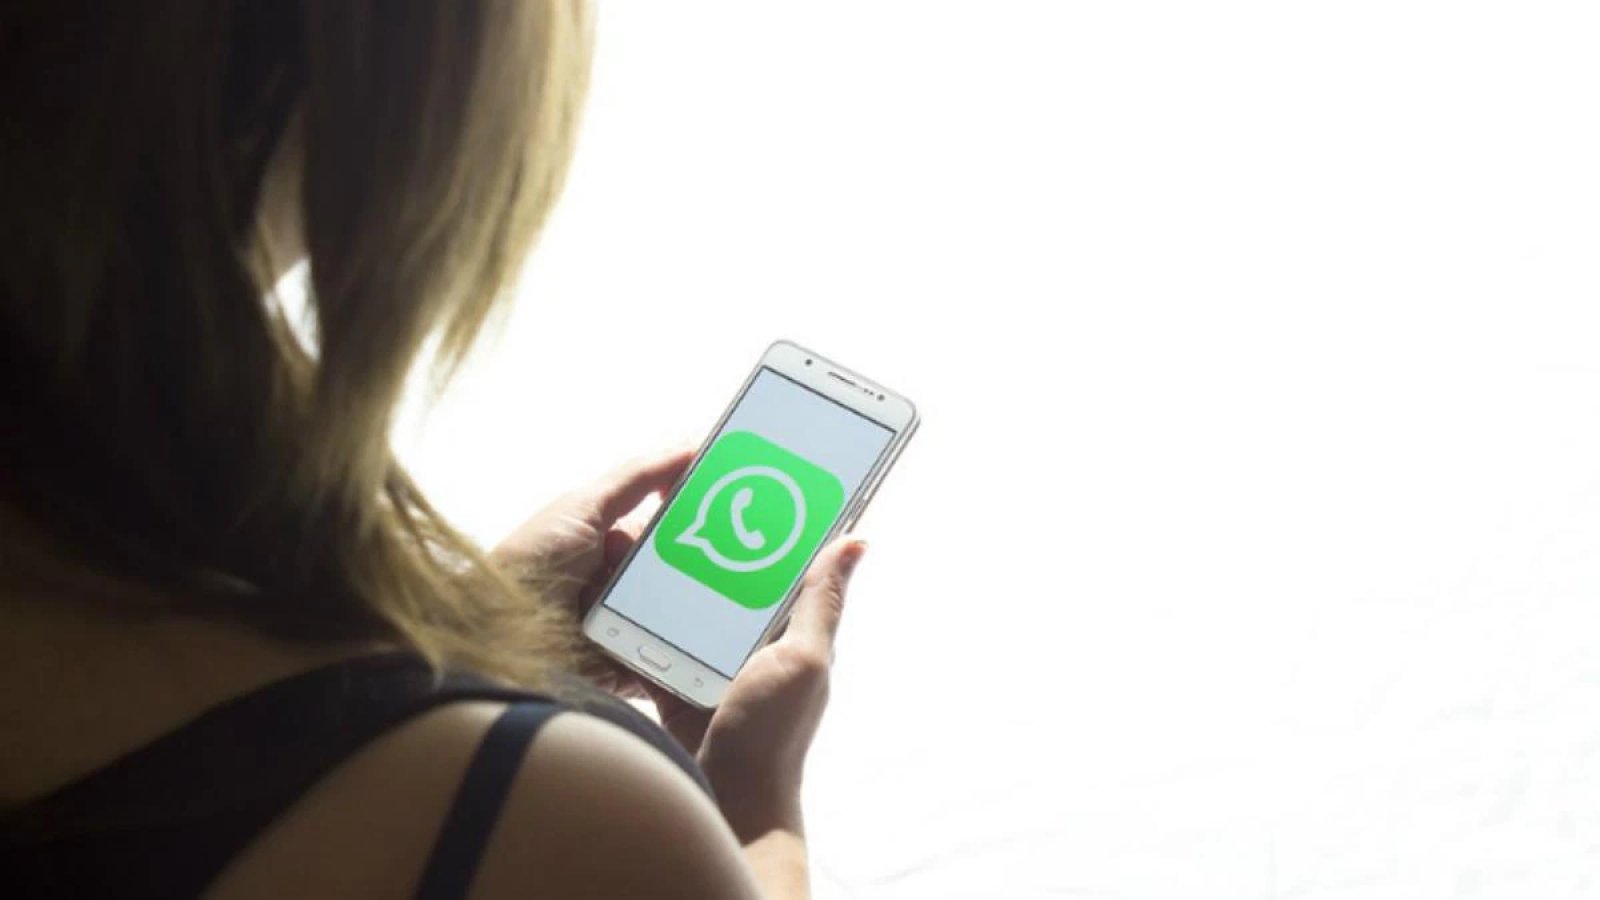 If you want to share HD-quality photos on WhatsApp, then this trick will help you